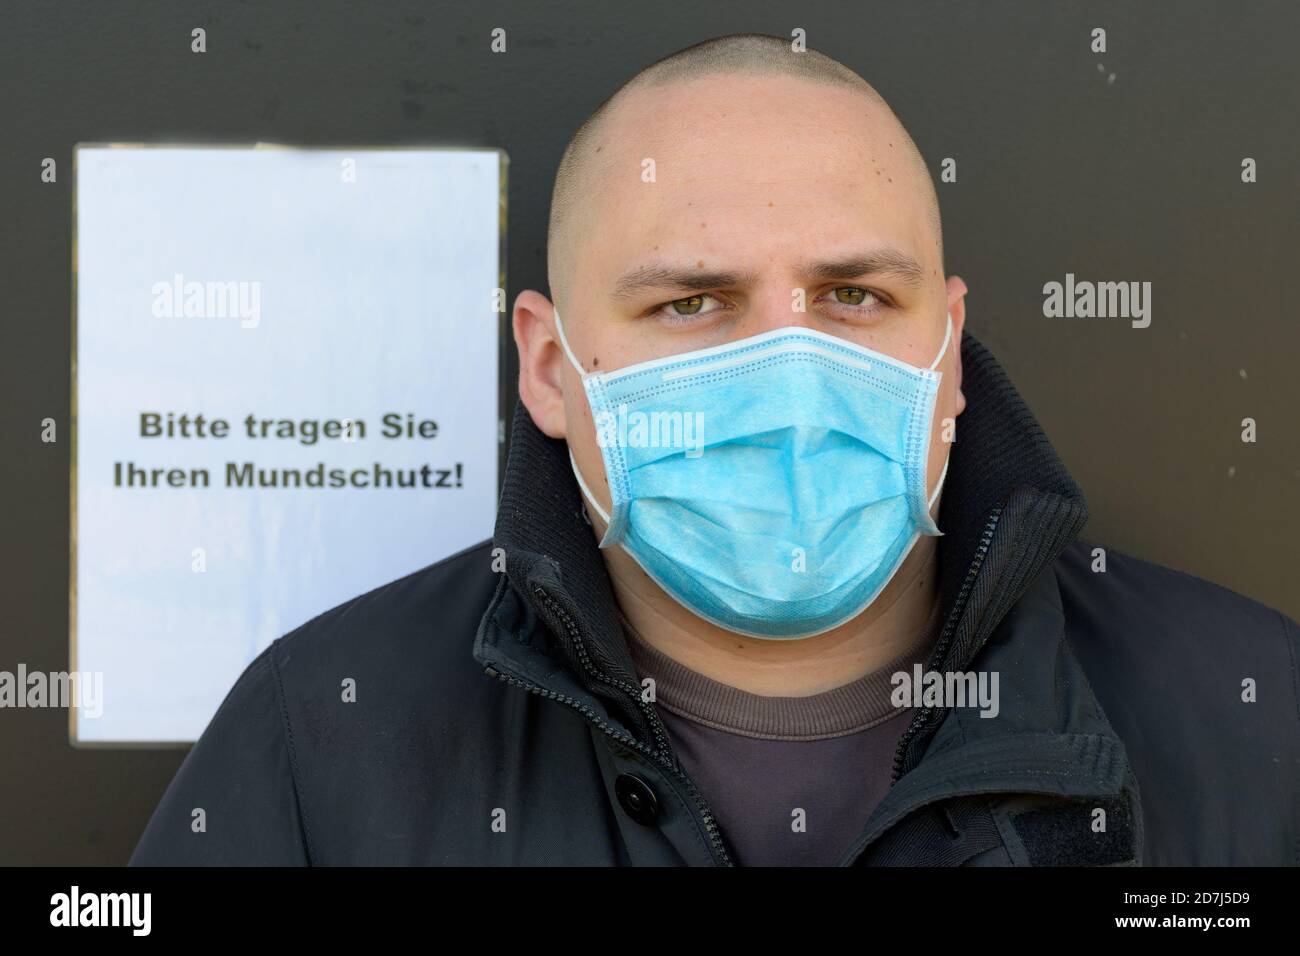 Young man wearing a face mask for infection control during the Covid-19 pandemic standing in front of a German text sign instructing people to wear th Stock Photo